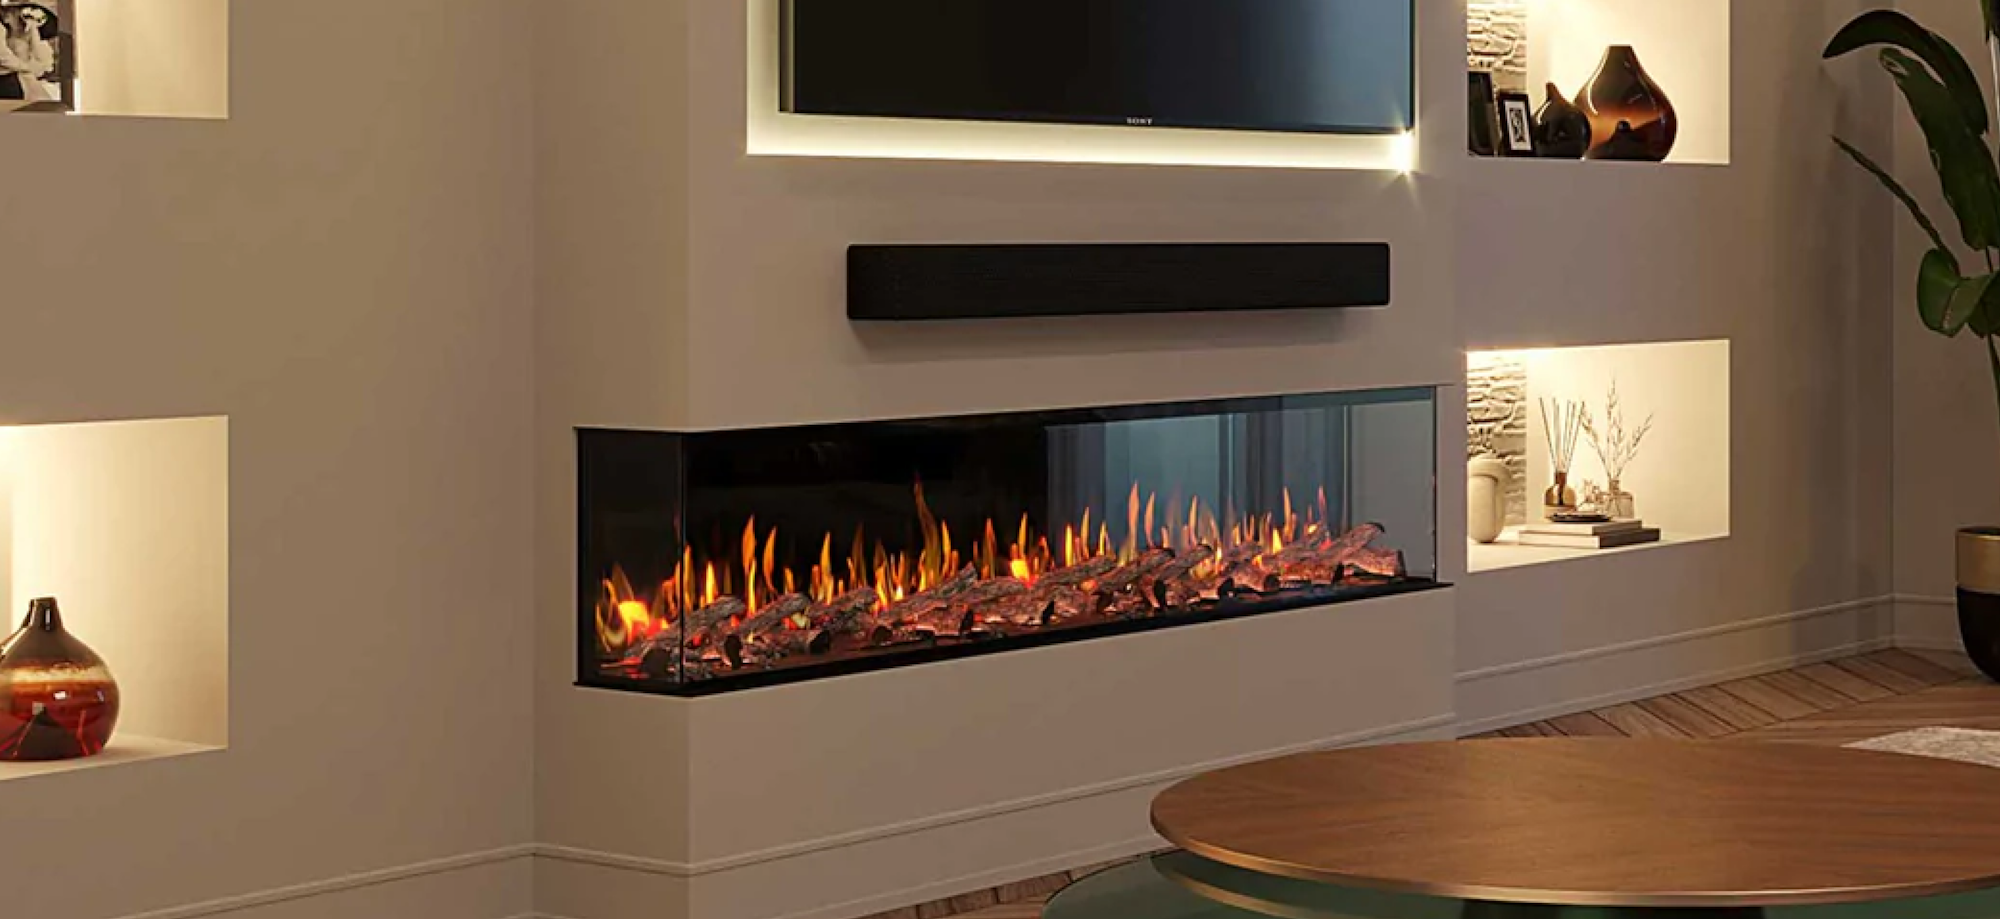 Matching Your Tv Size To Your Fireplace. | Fireplace Factory